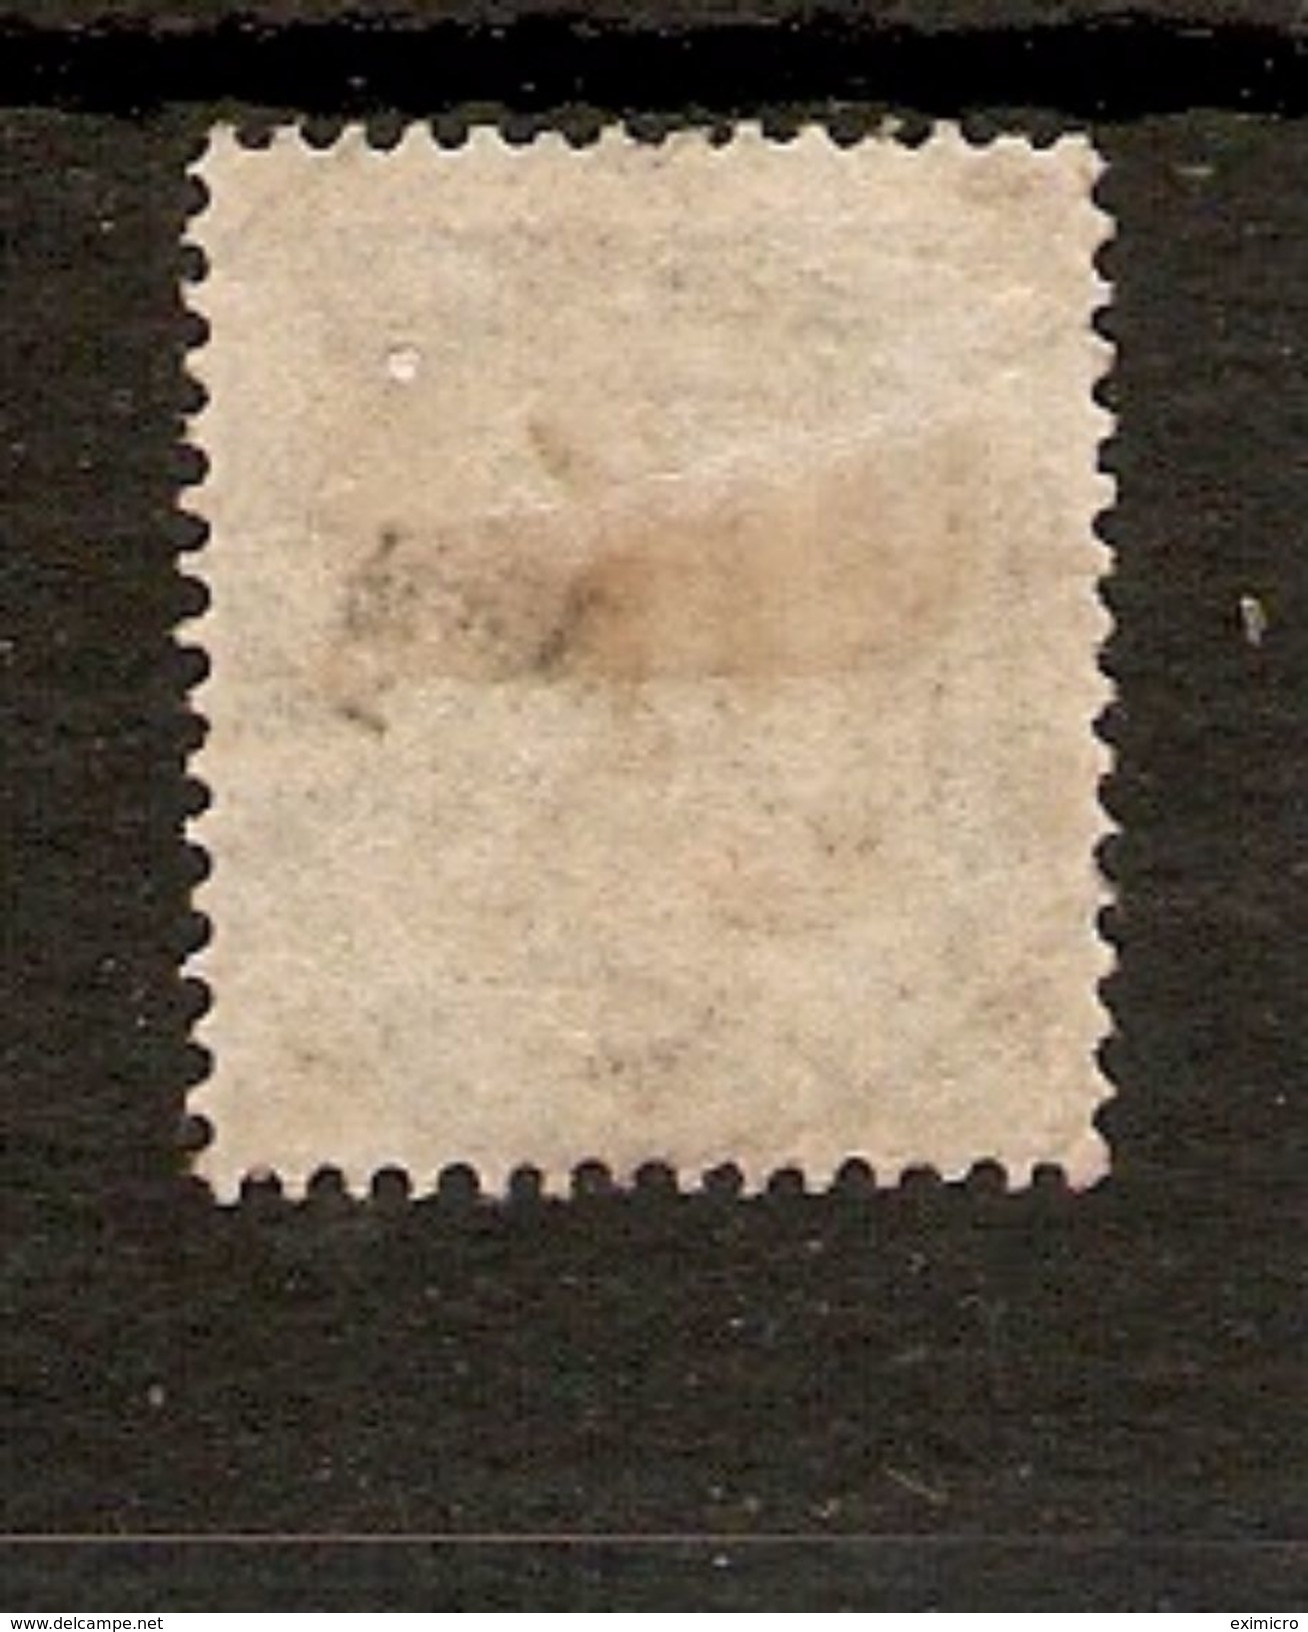 INDIA 1856 ½a PALE BLUE SG 38 NO WATERMARK FINE USED - 1854 East India Company Administration